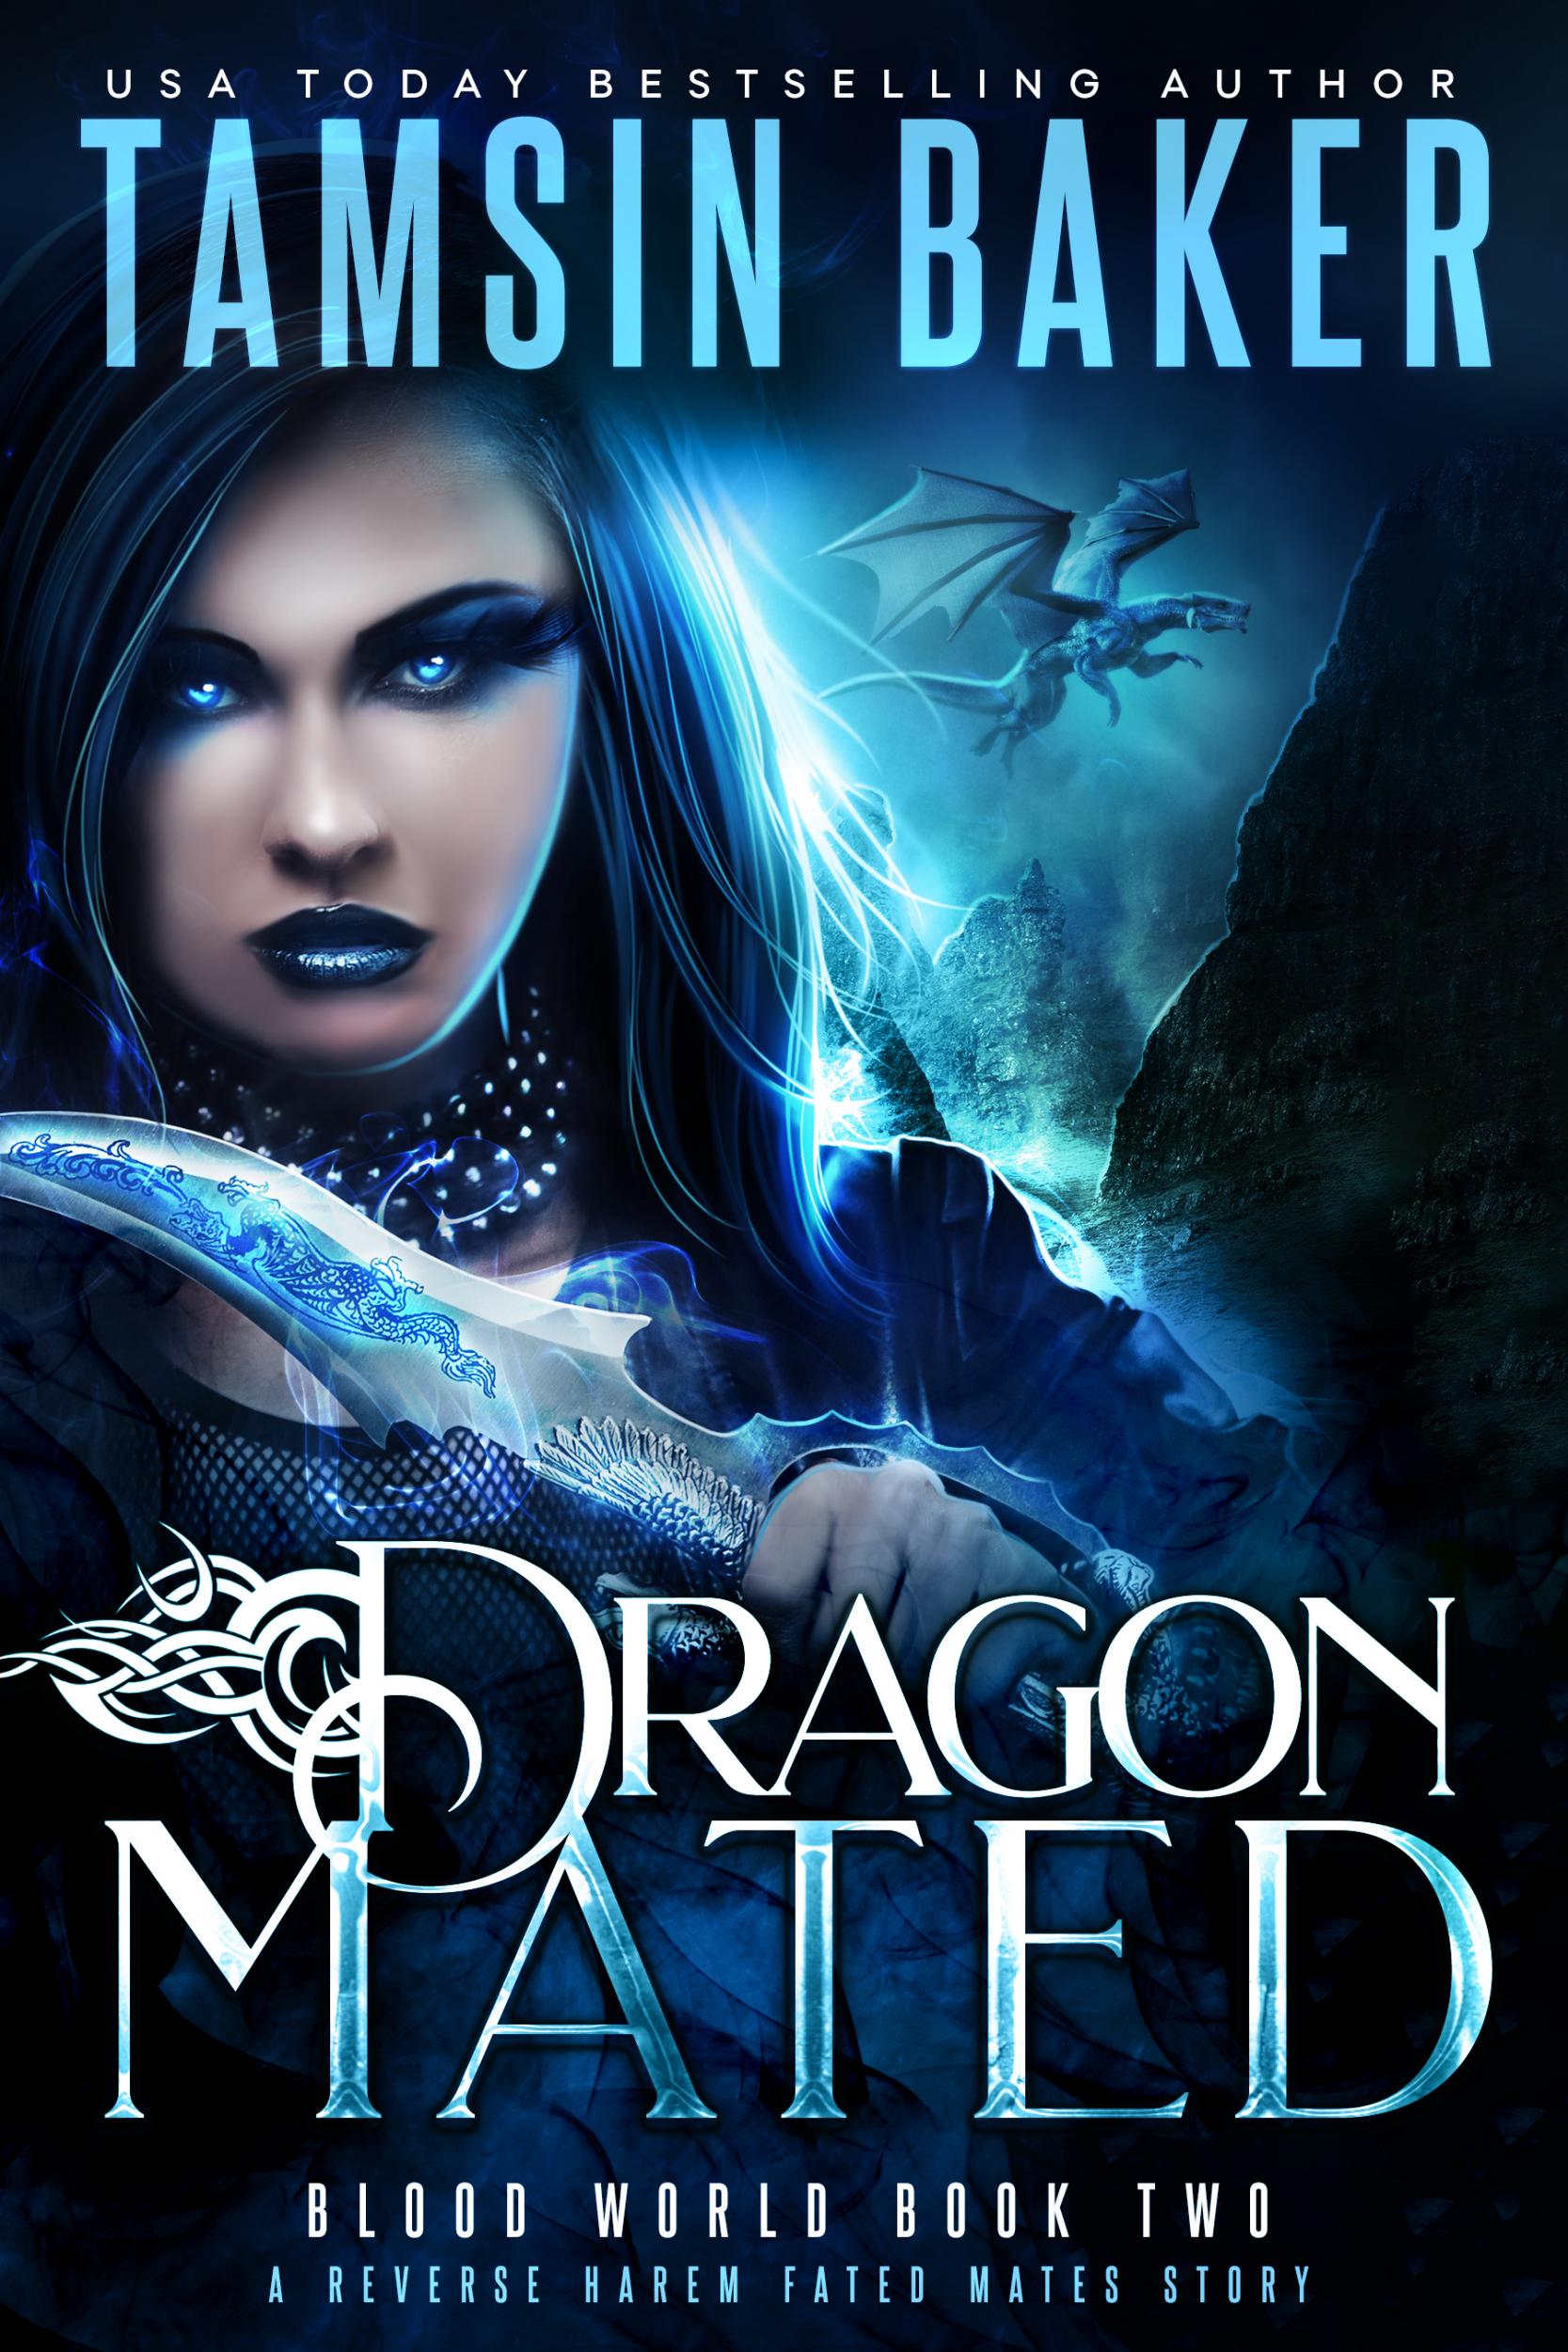 Get your free copy of Dragon Mated by Tamsin Baker | Booksprout